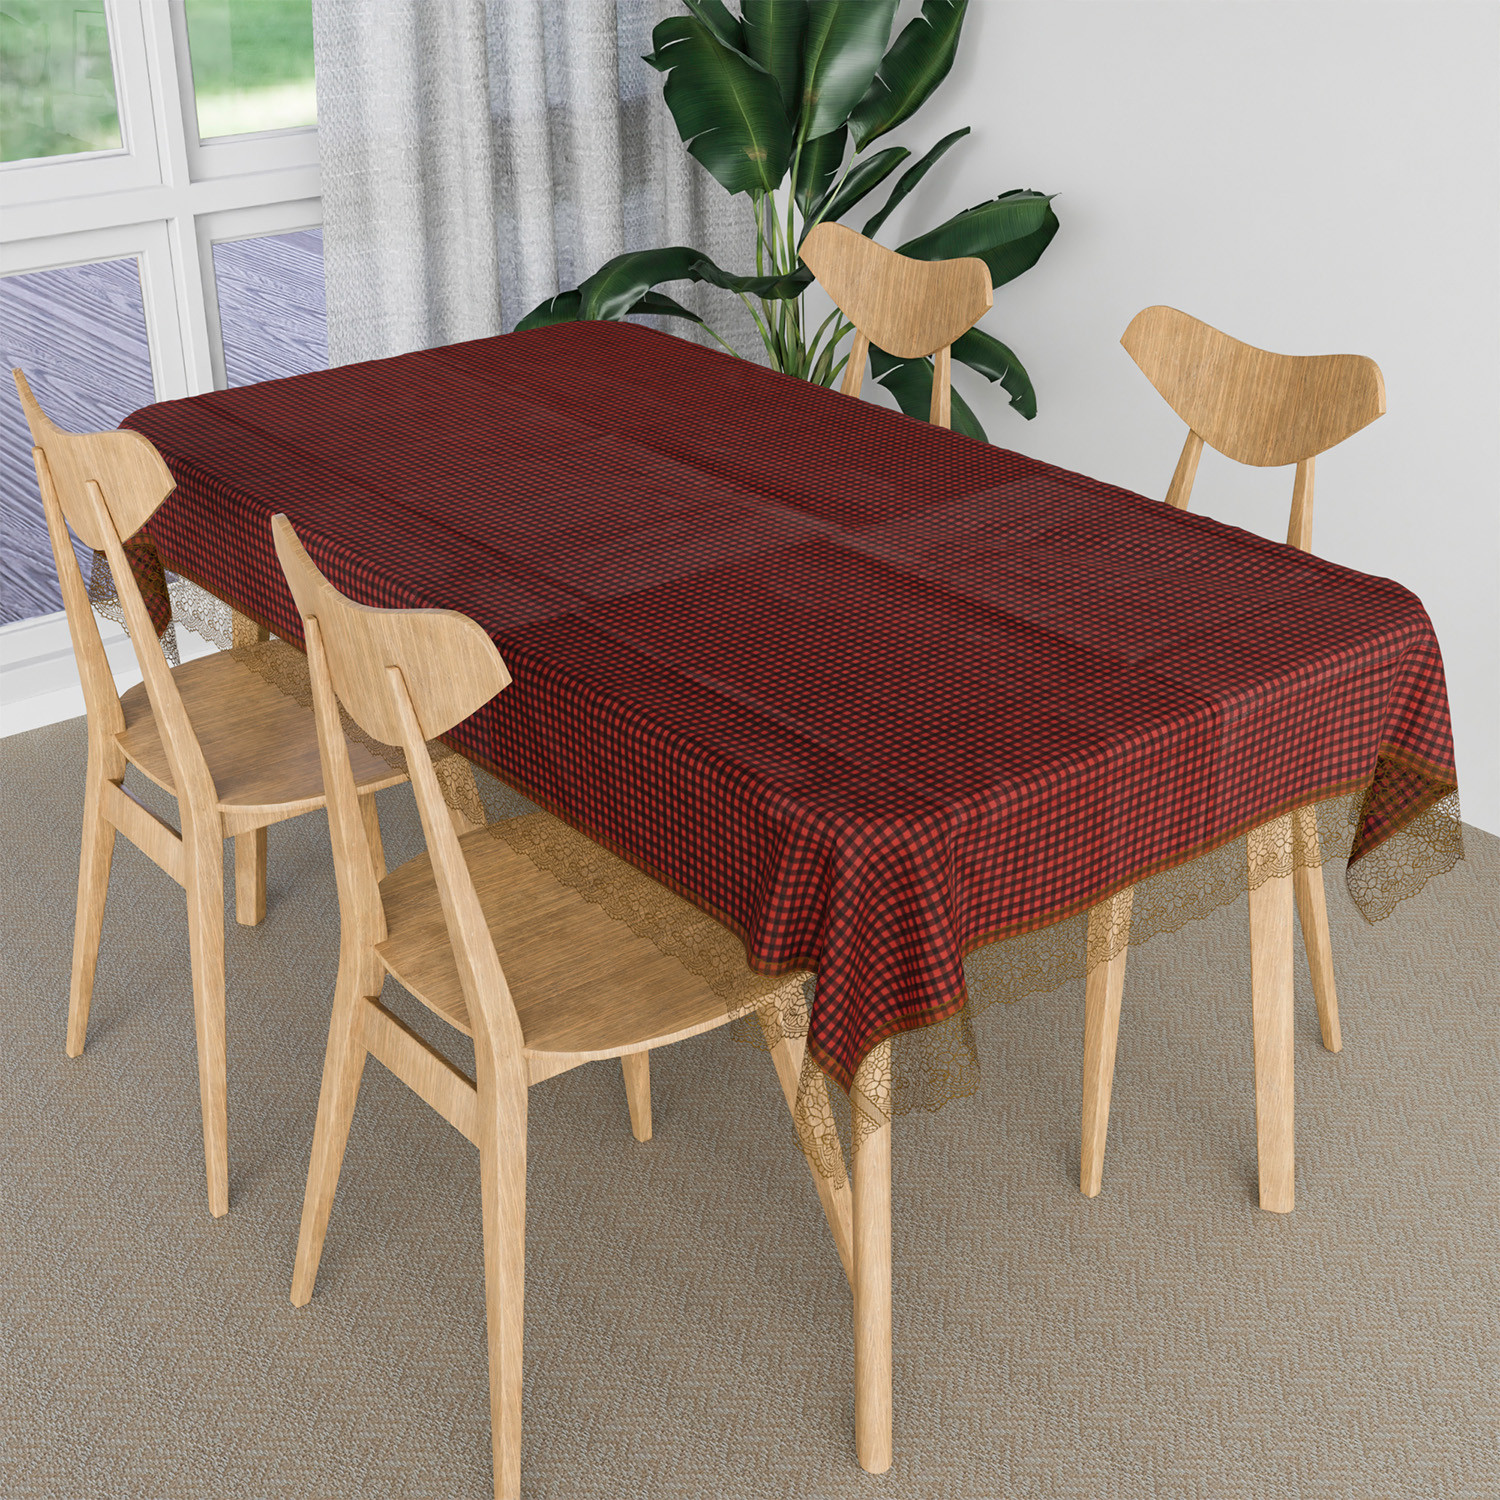 Kuber Industries Dining Table Cover | Kitchen Dining Tablecloth | 4 Seater Center Table Cover | Dining Table Cover for Hall Décor | Barik Check Kitchen Tablecloth | 45x70 | Maroon